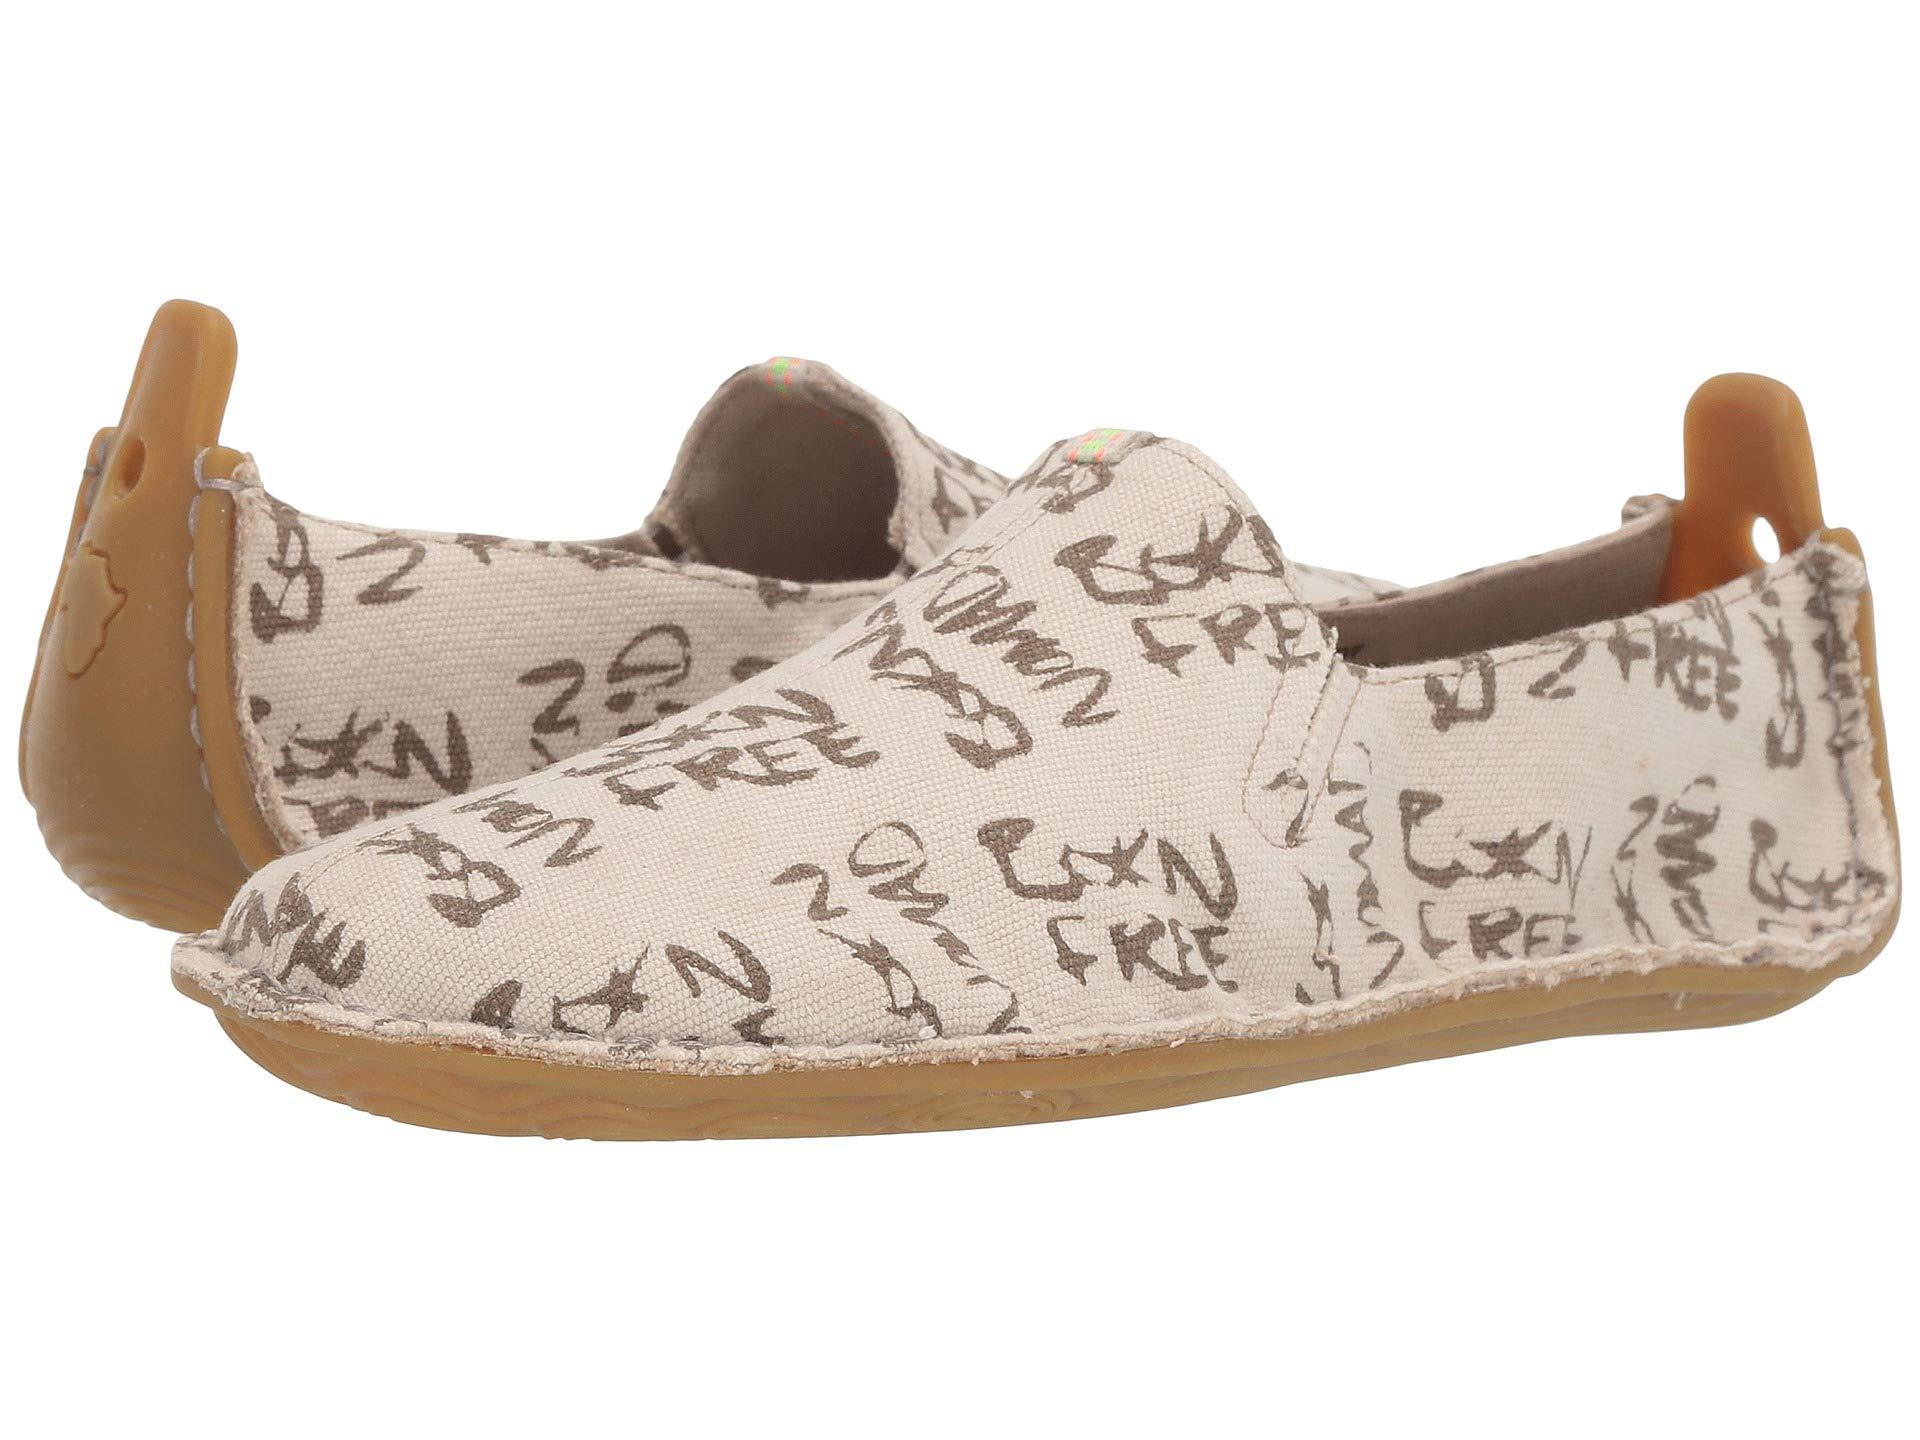 Vivobarefoot Ababa Born Free Canvas in Beige (Natural) - Lyst